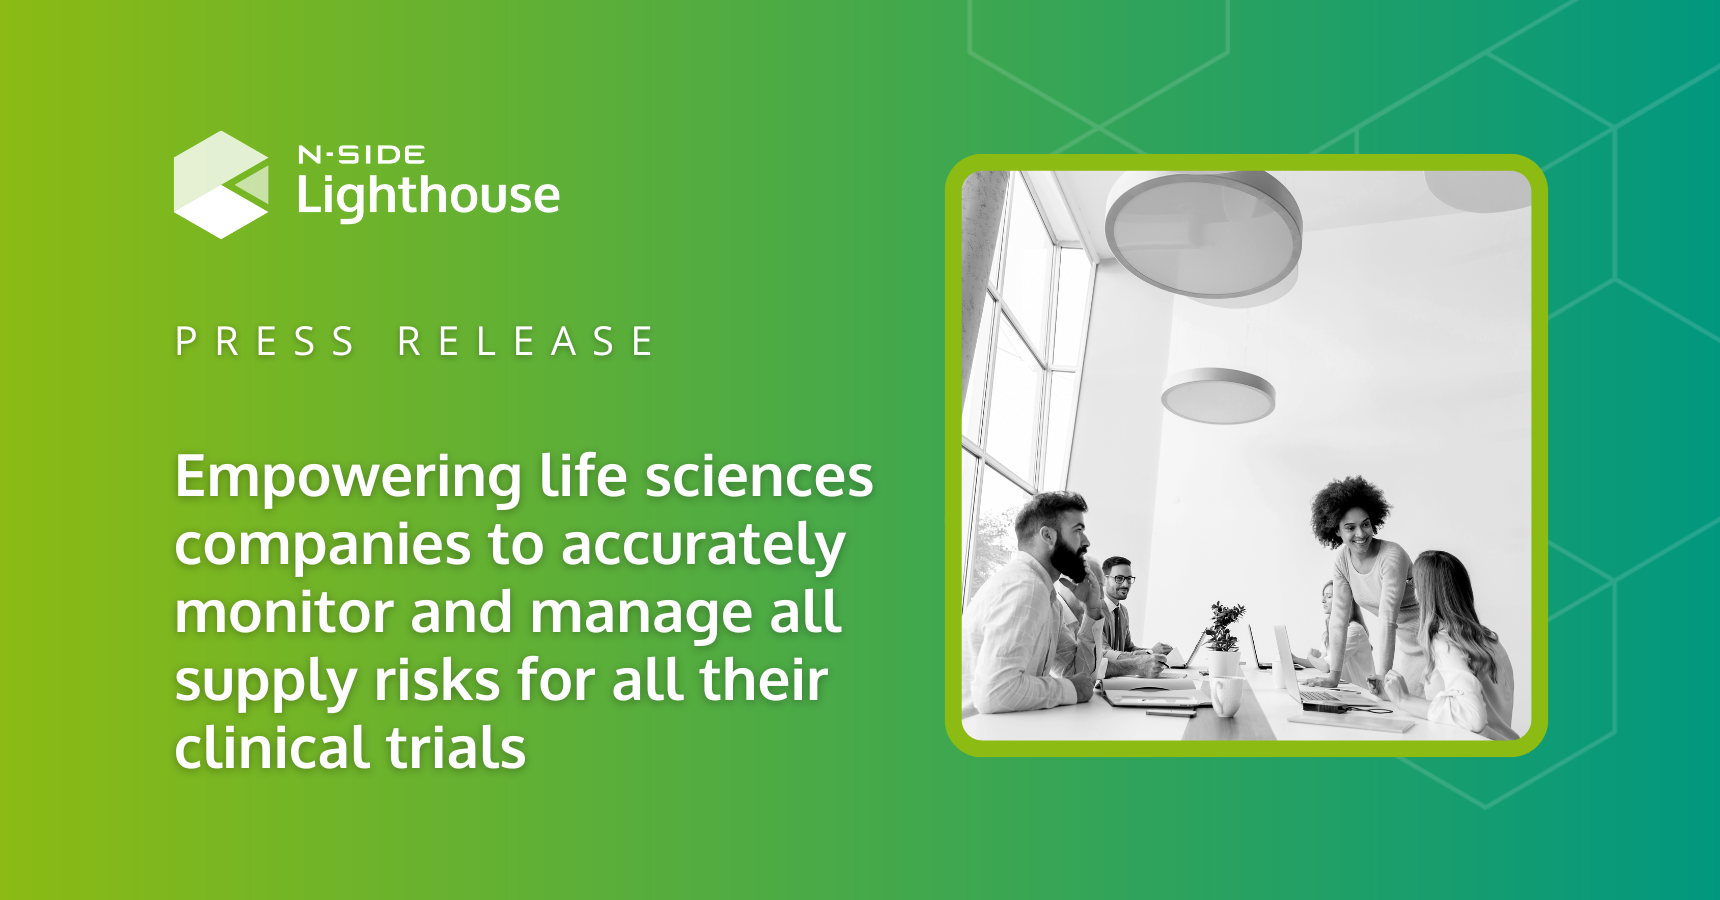 Empowering life sciences companies to accurately monitor and manage all supply risks for all their clinical trials